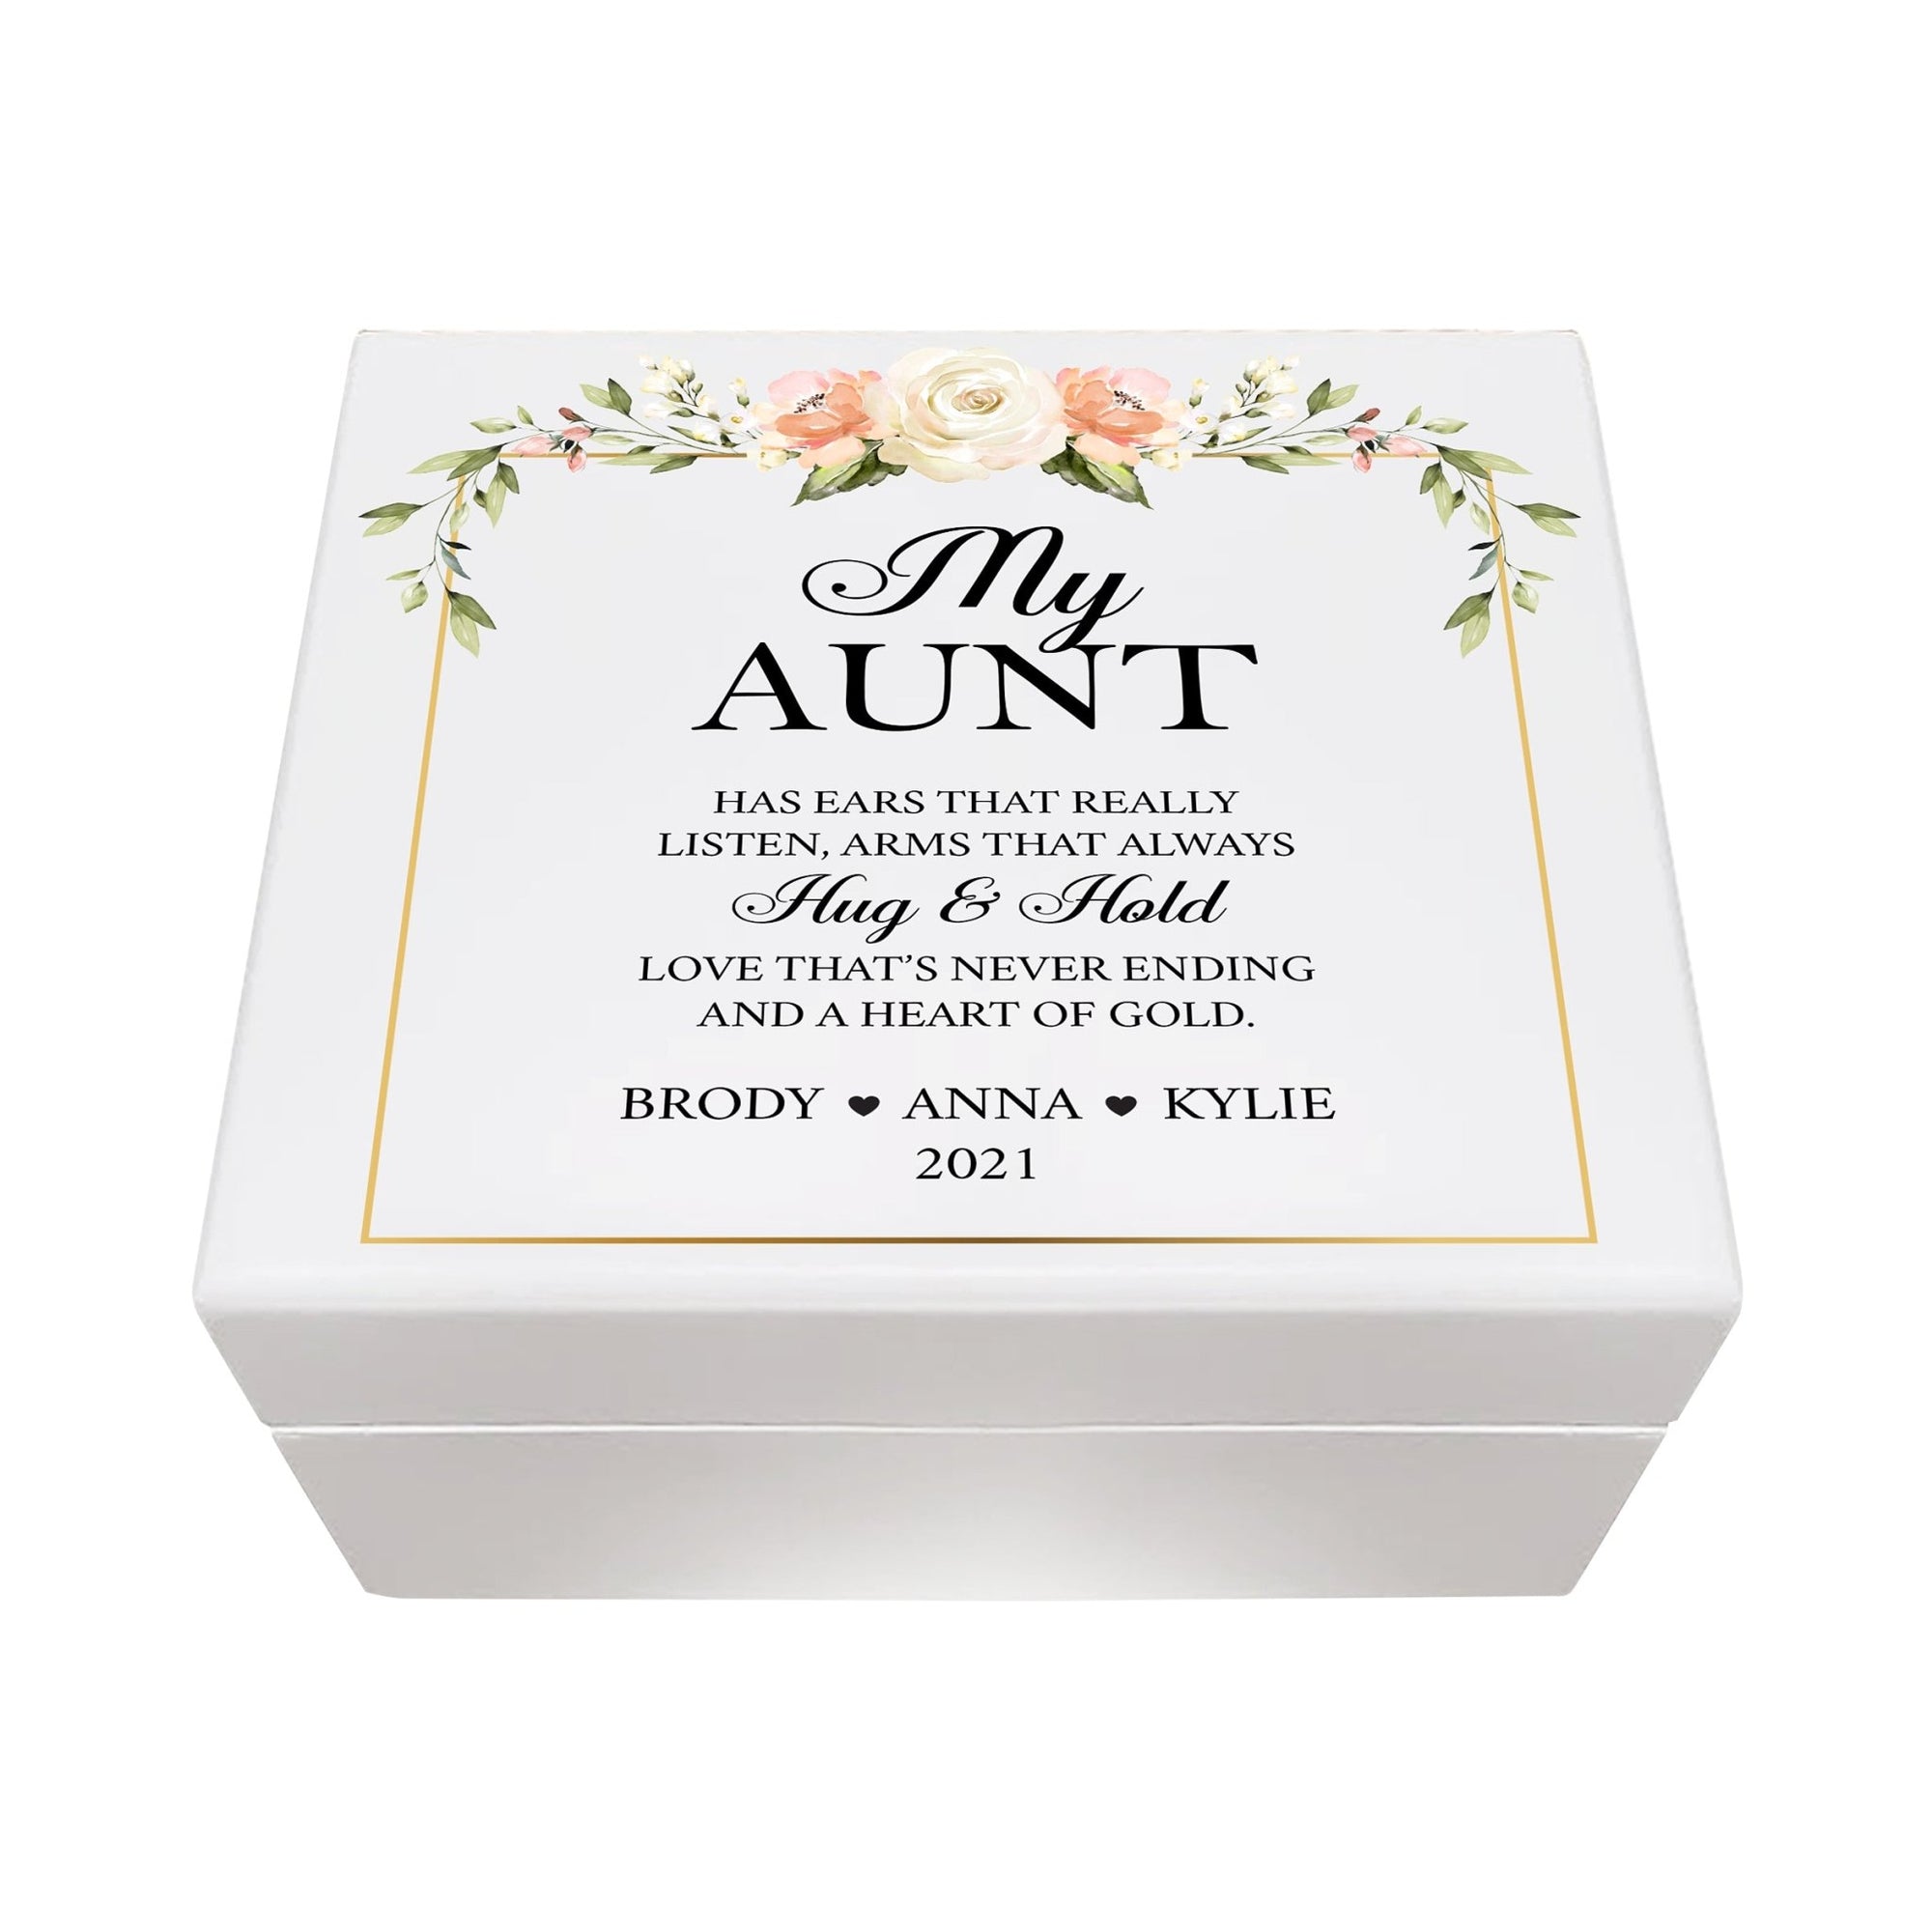 Personalized Memorable Aunt’s White Keepsake Box 6x5.5in with inspiring verse - Hug and Hold - LifeSong Milestones